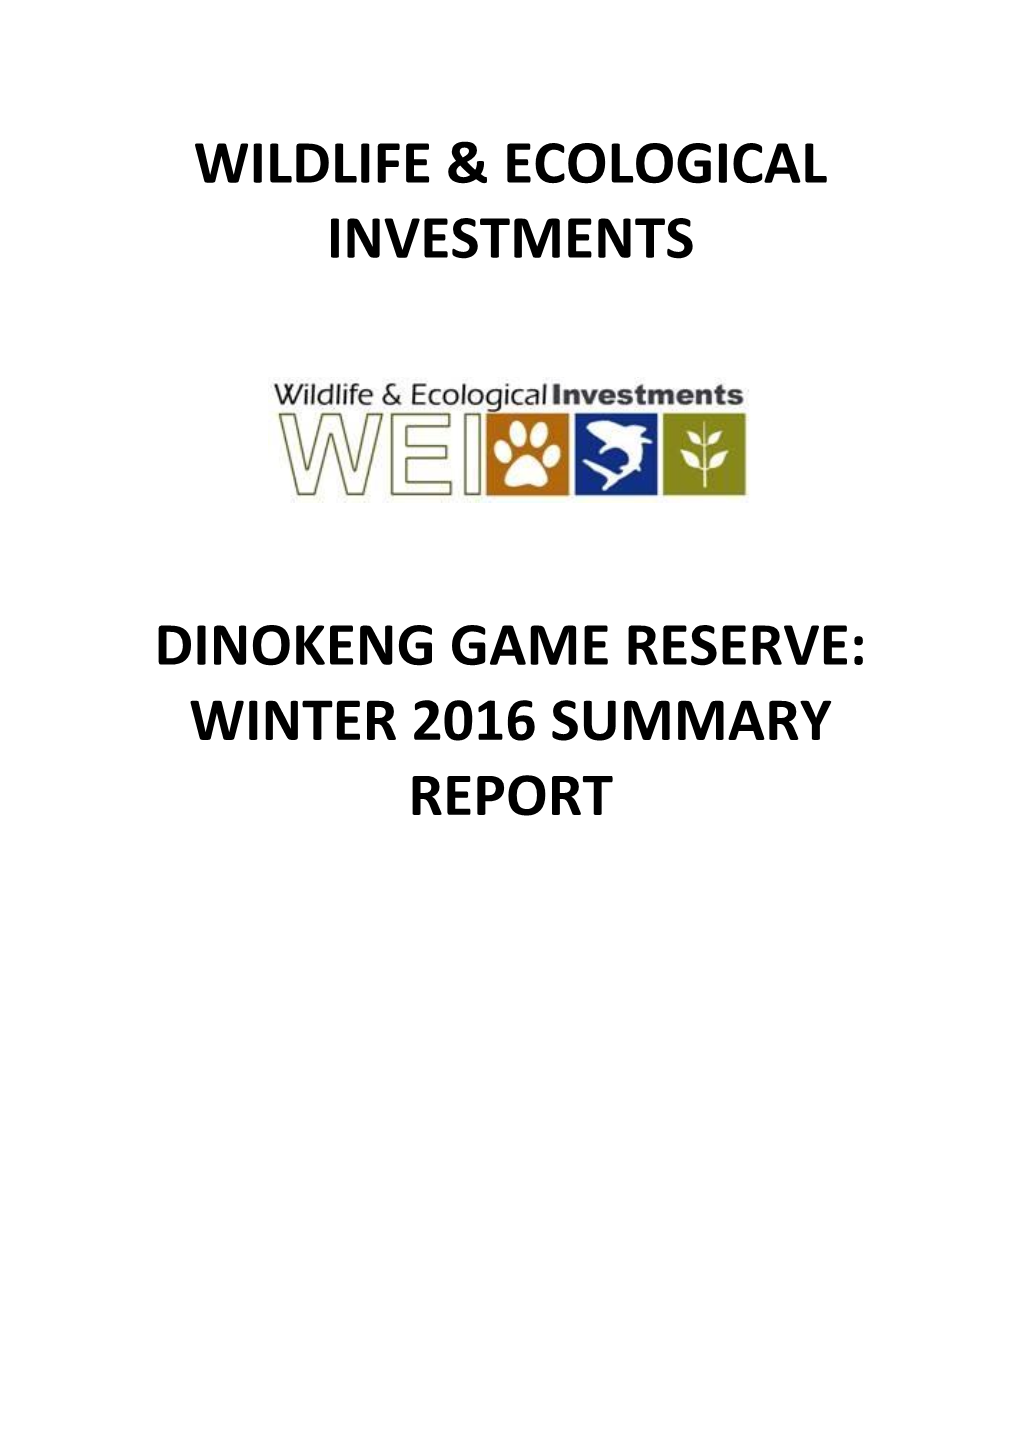 Wildlife & Ecological Investments Dinokeng Game Reserve